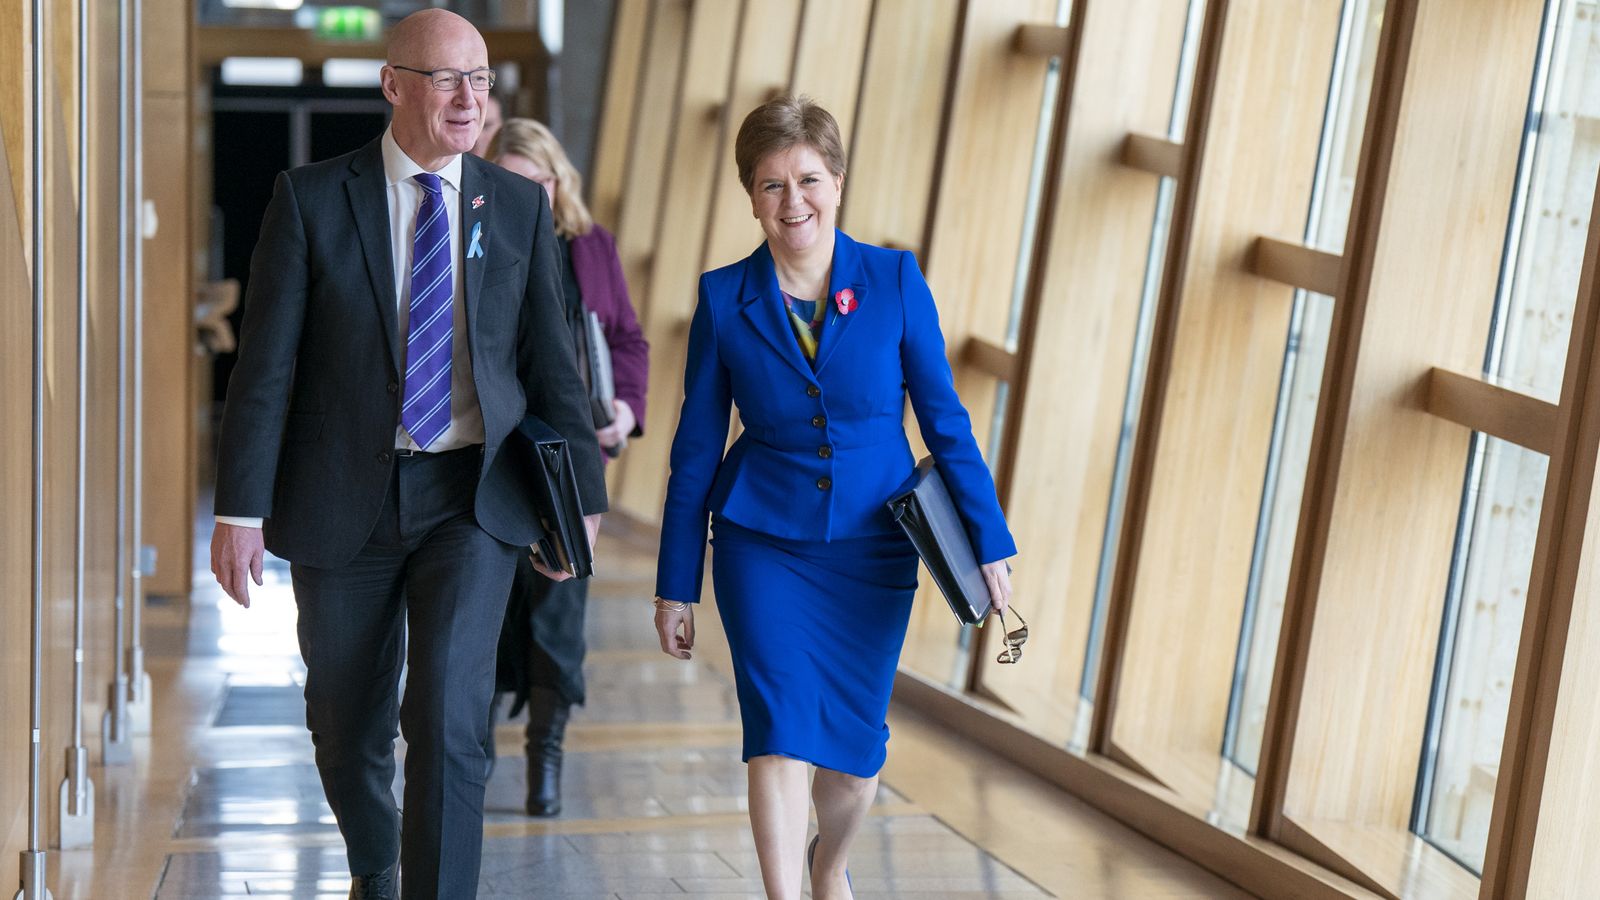 Nicola Sturgeon 'at peace and comfortable' with decision to step down, says John Swinney